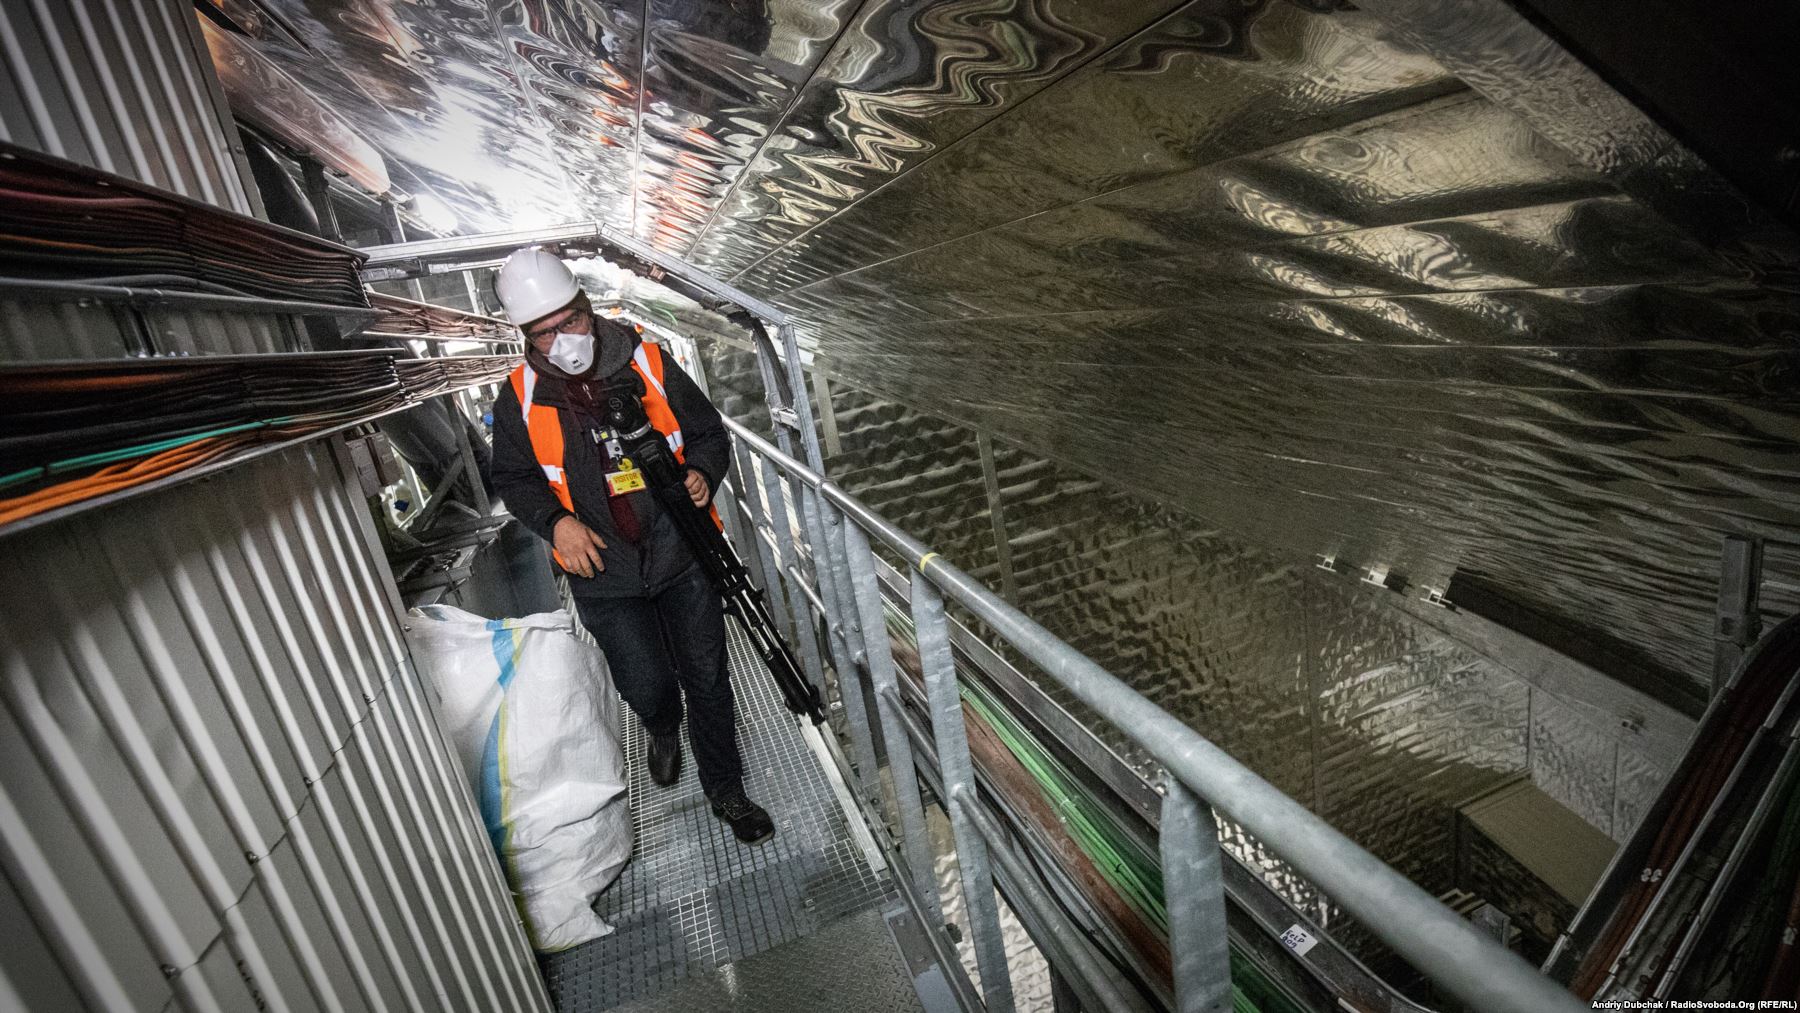 Chernobyl's New Safe Confinement (NSC) contains a labyrinth of passages, suspended walkways, and stairs. Elevators will be used in the future, but are still being installed and tested. Photo by: Andriy Dubchak